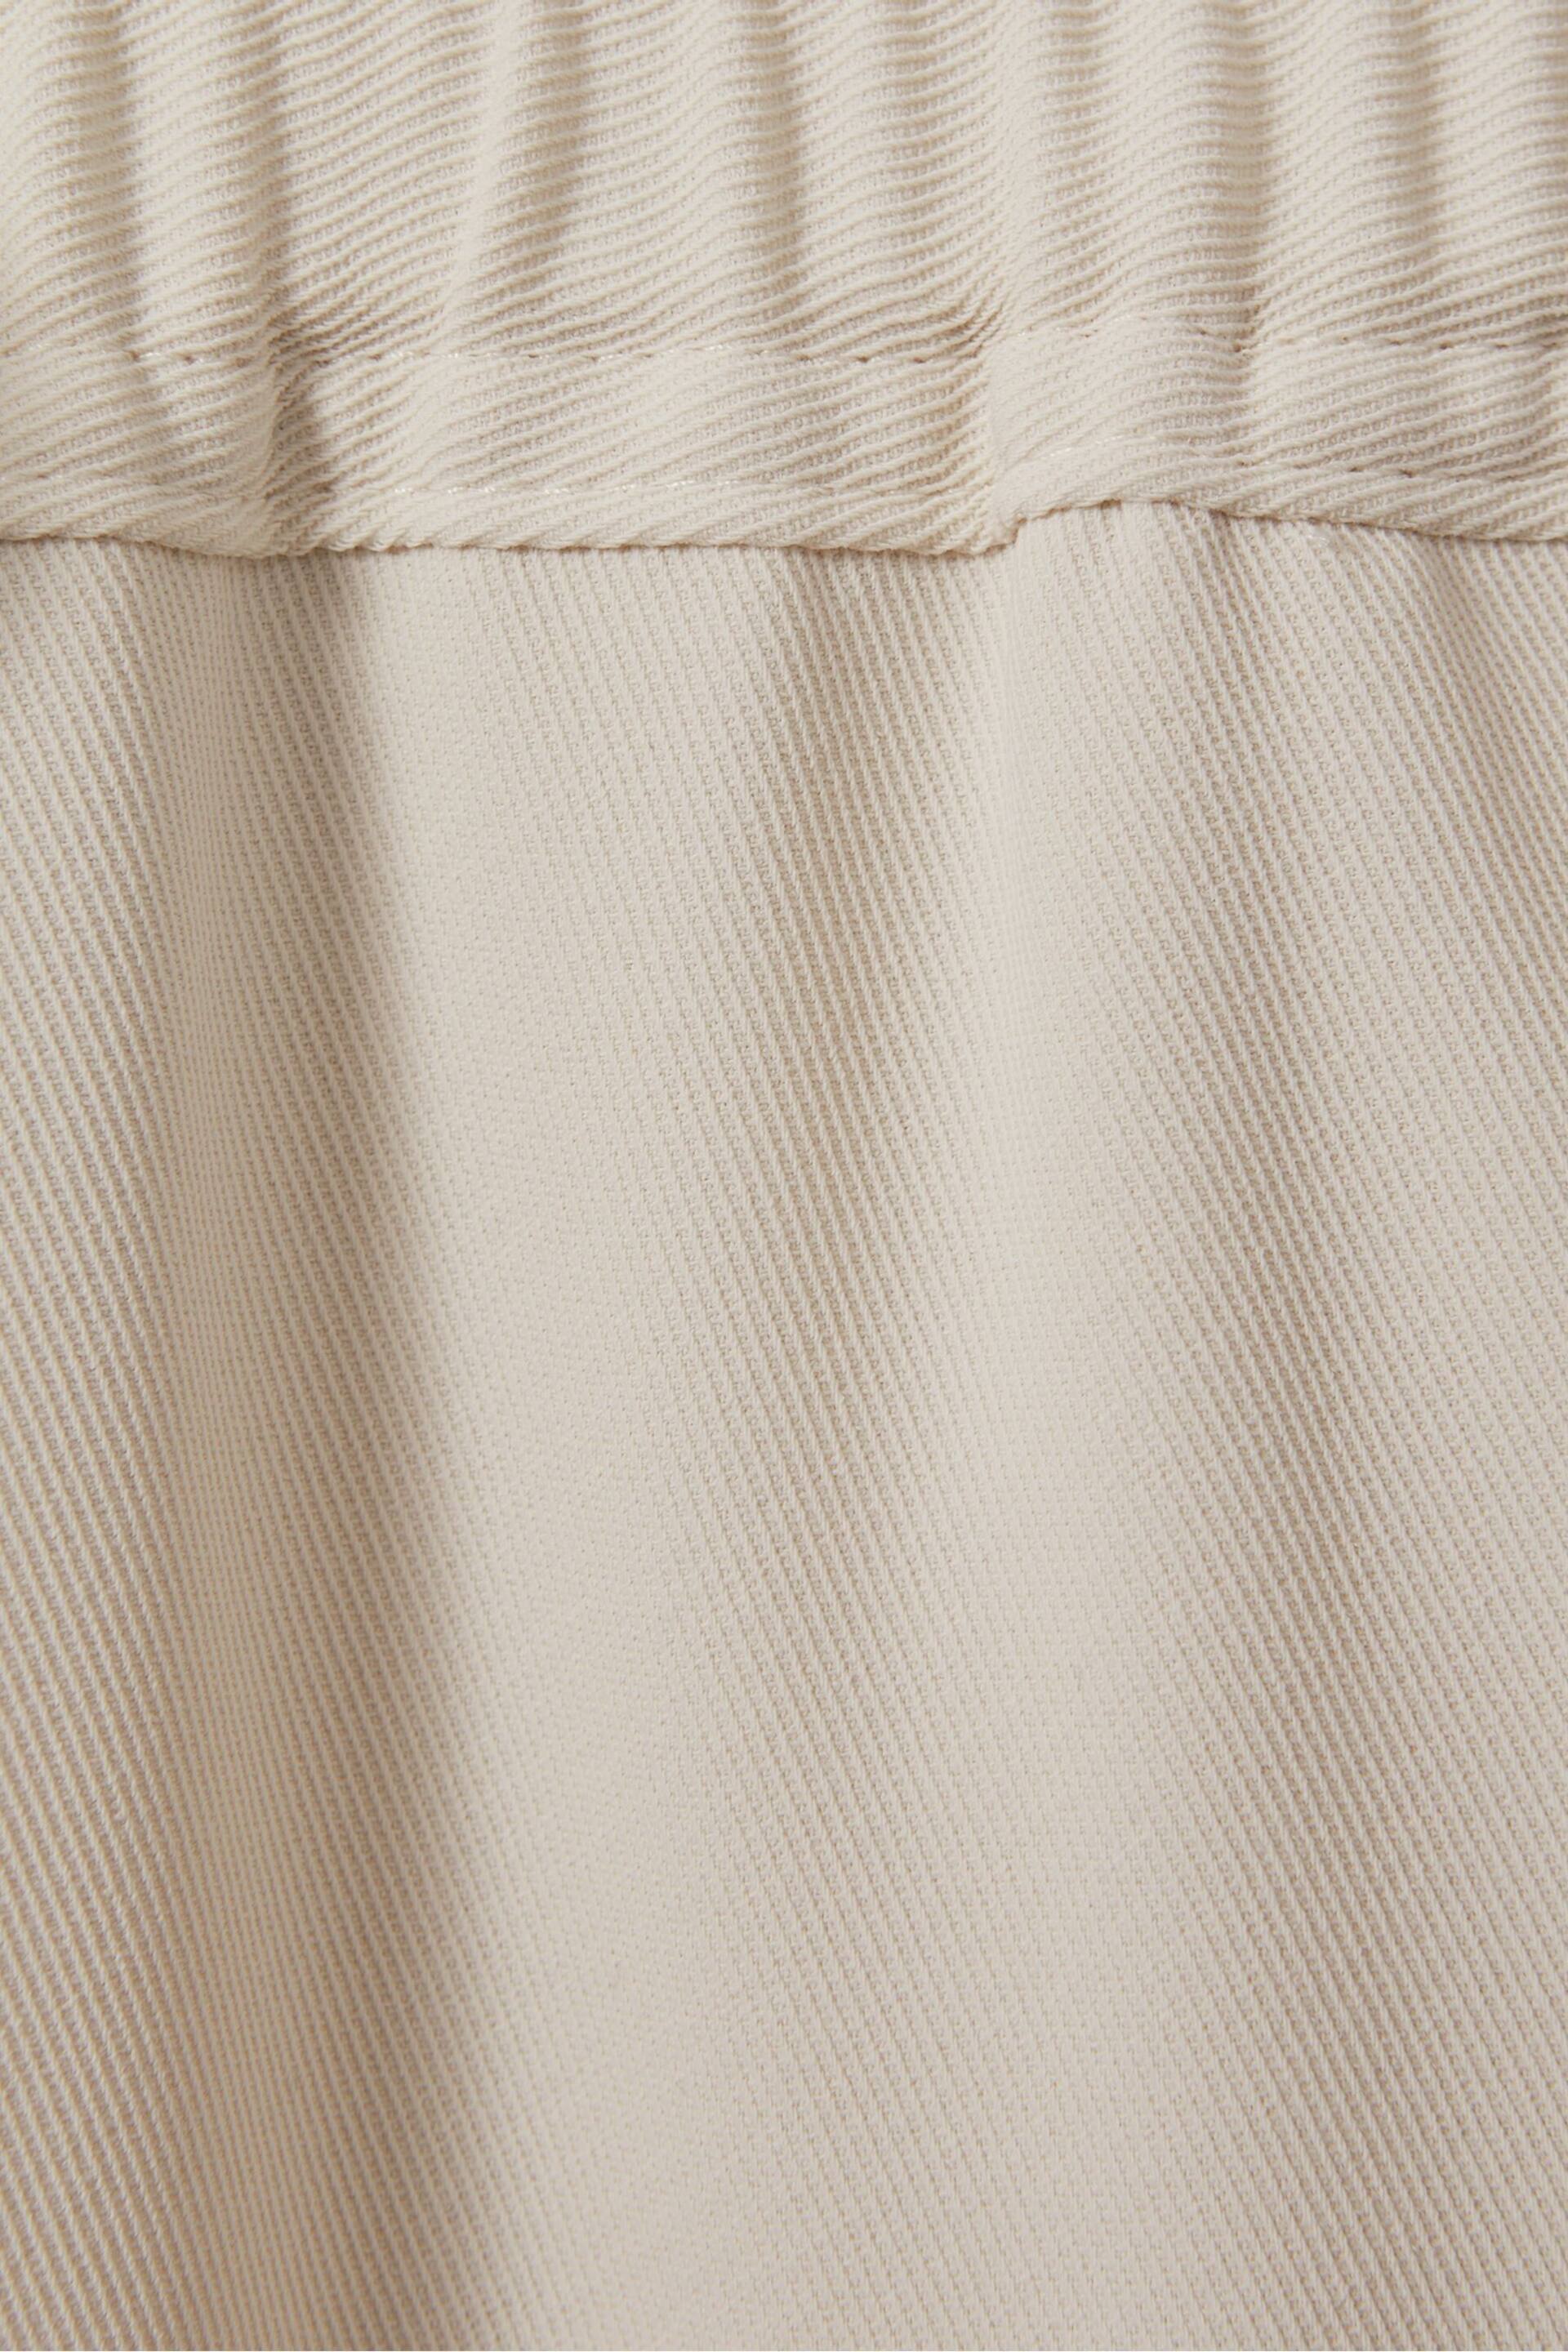 Reiss Cream Hailey Petite Tapered Pull On Trousers - Image 6 of 6